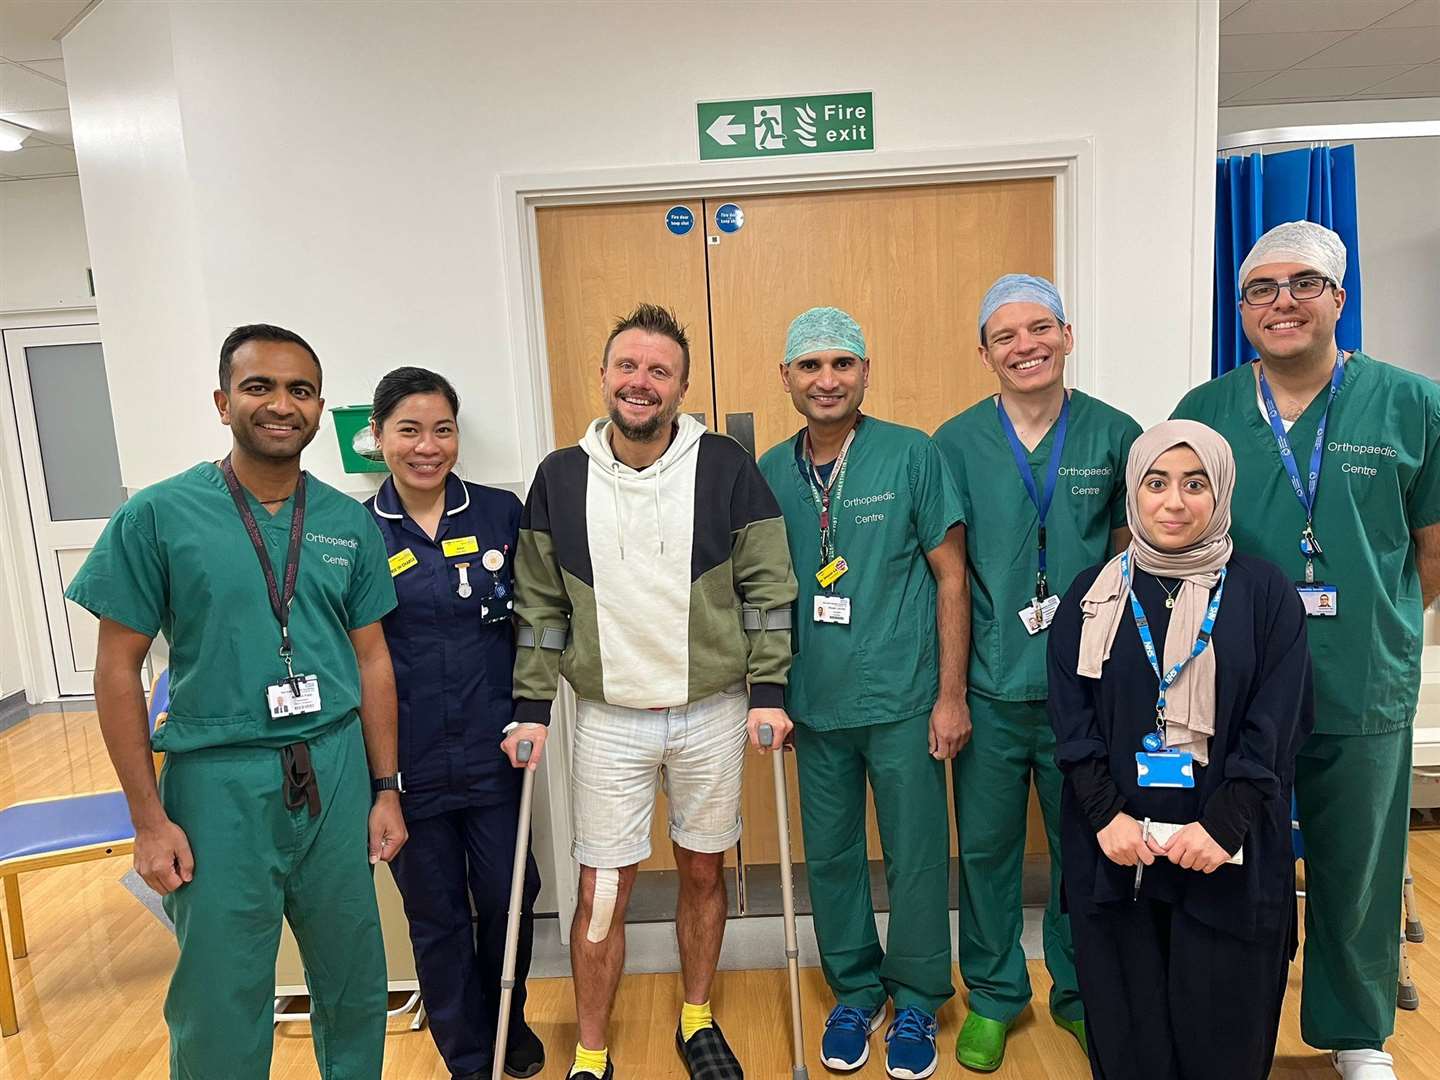 Stephen Wall, from Folkestone, is the first patient in east Kent to have a form of knee replacement surgery and be discharged the same day. Picture: East Kent Hospitals University NHS Foundation Trust